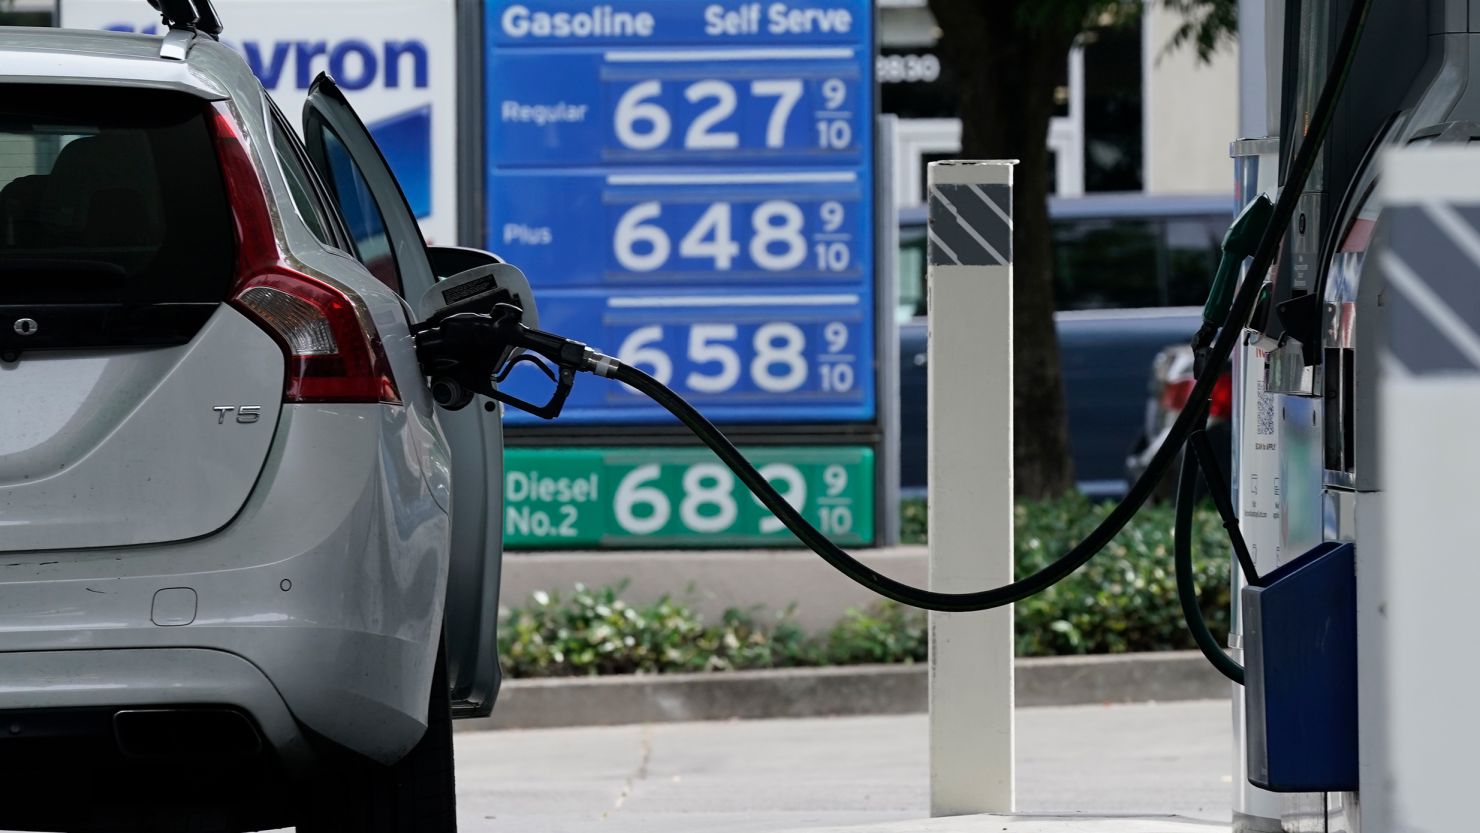 Gas prices over the $6 dollar mark are displayed at a gas station in Sacramento, California, on May 27, 2022.